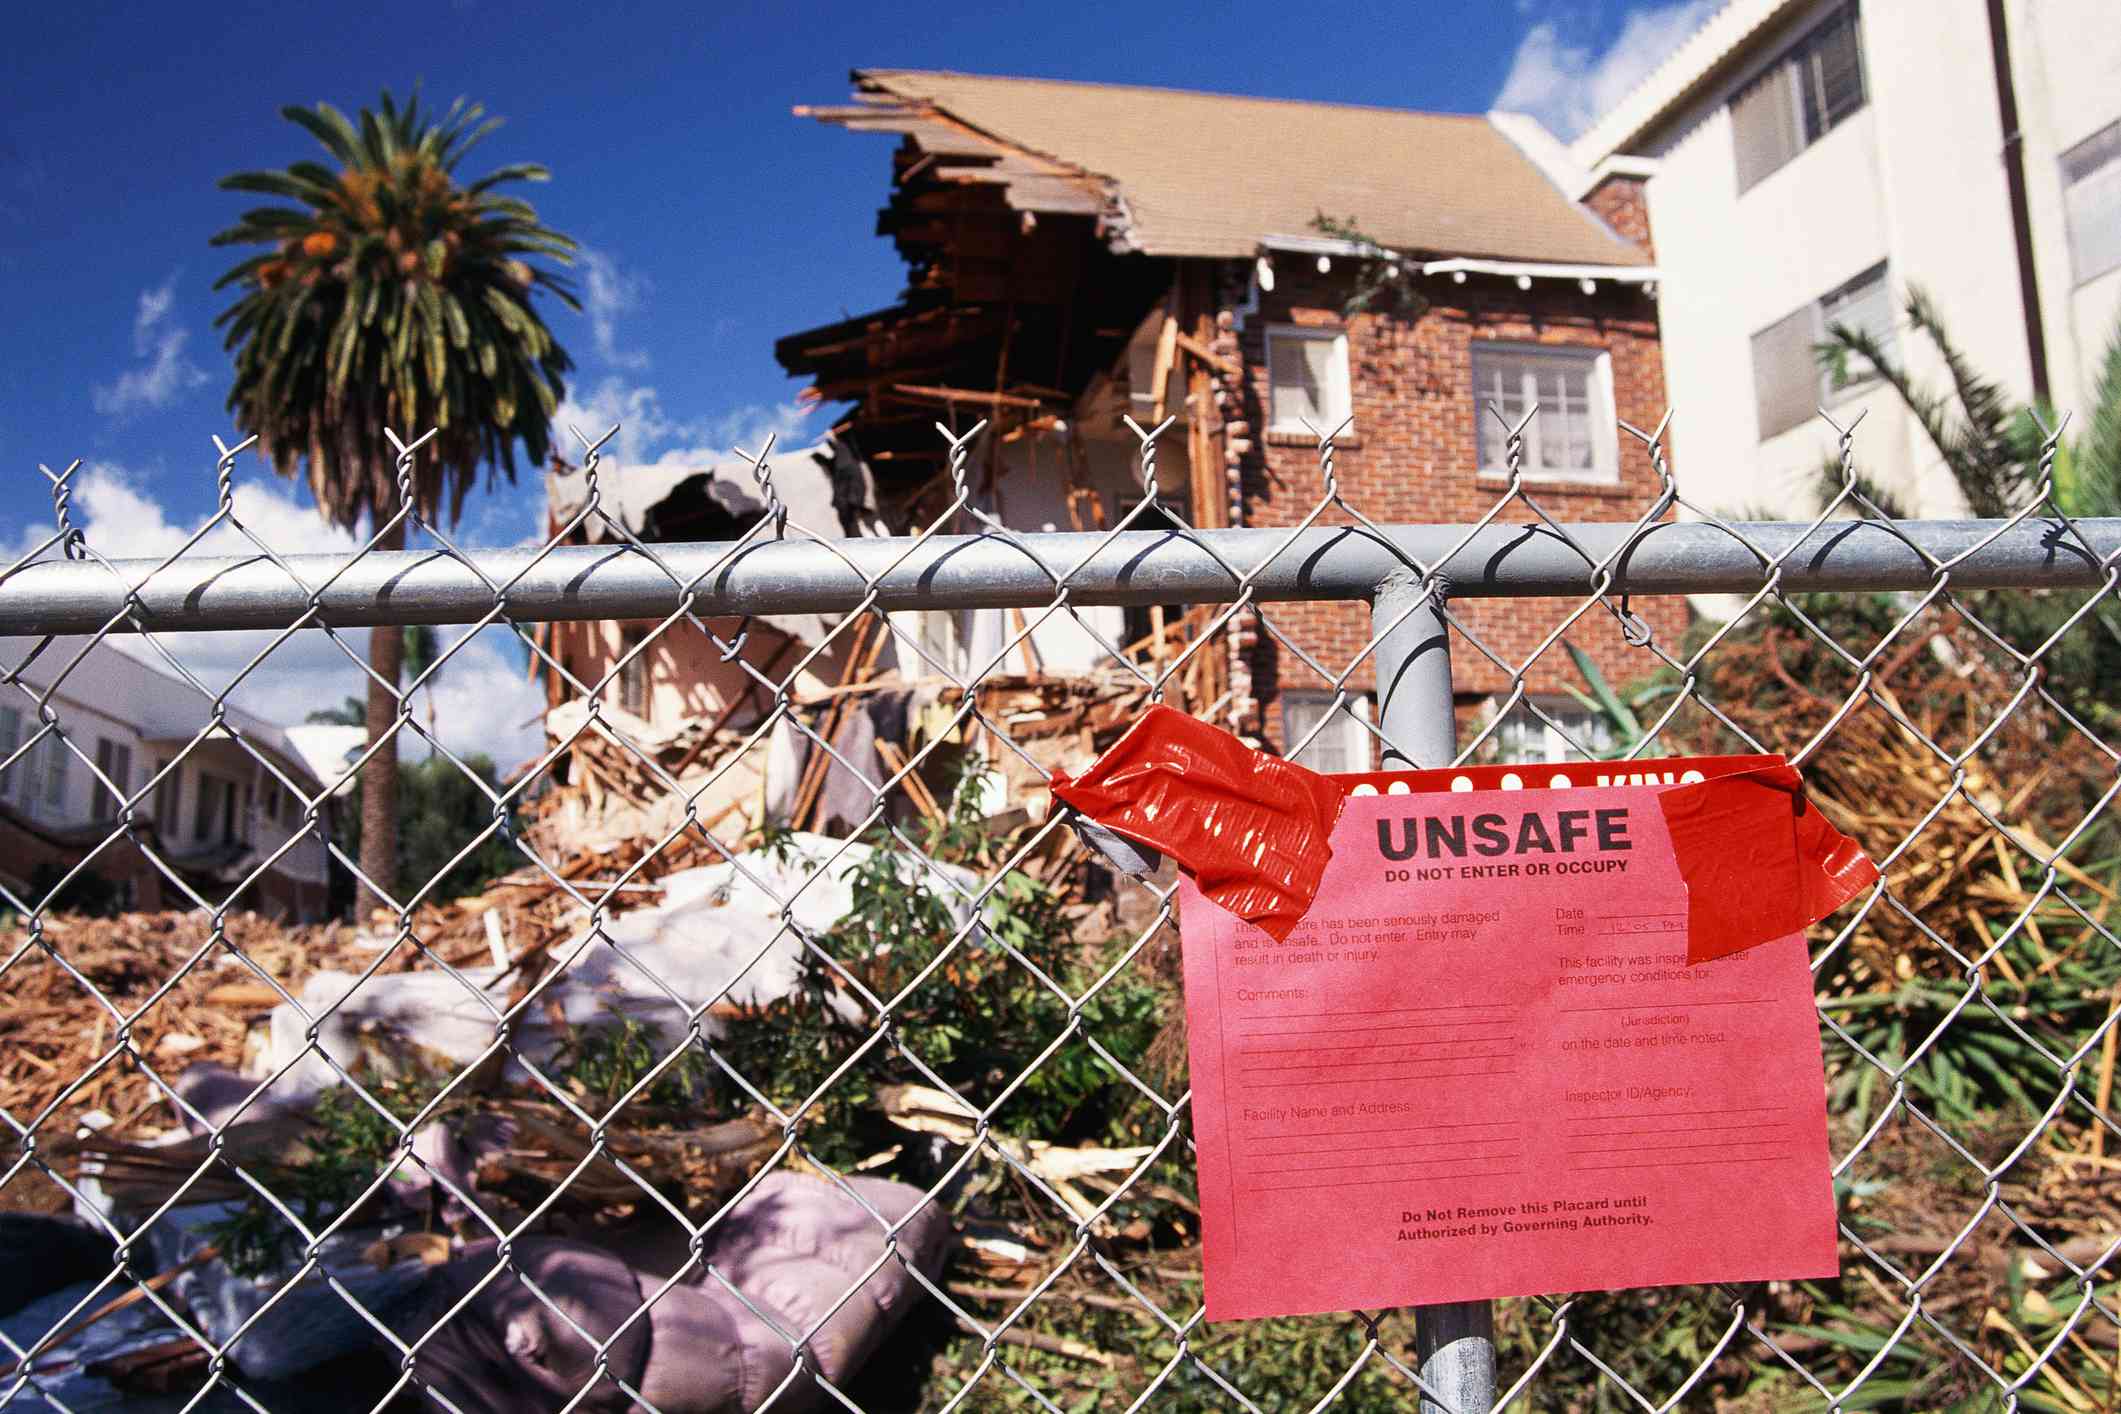 Home destroyed by hurricane, with “Unsafe” sign taped to chain-link fence